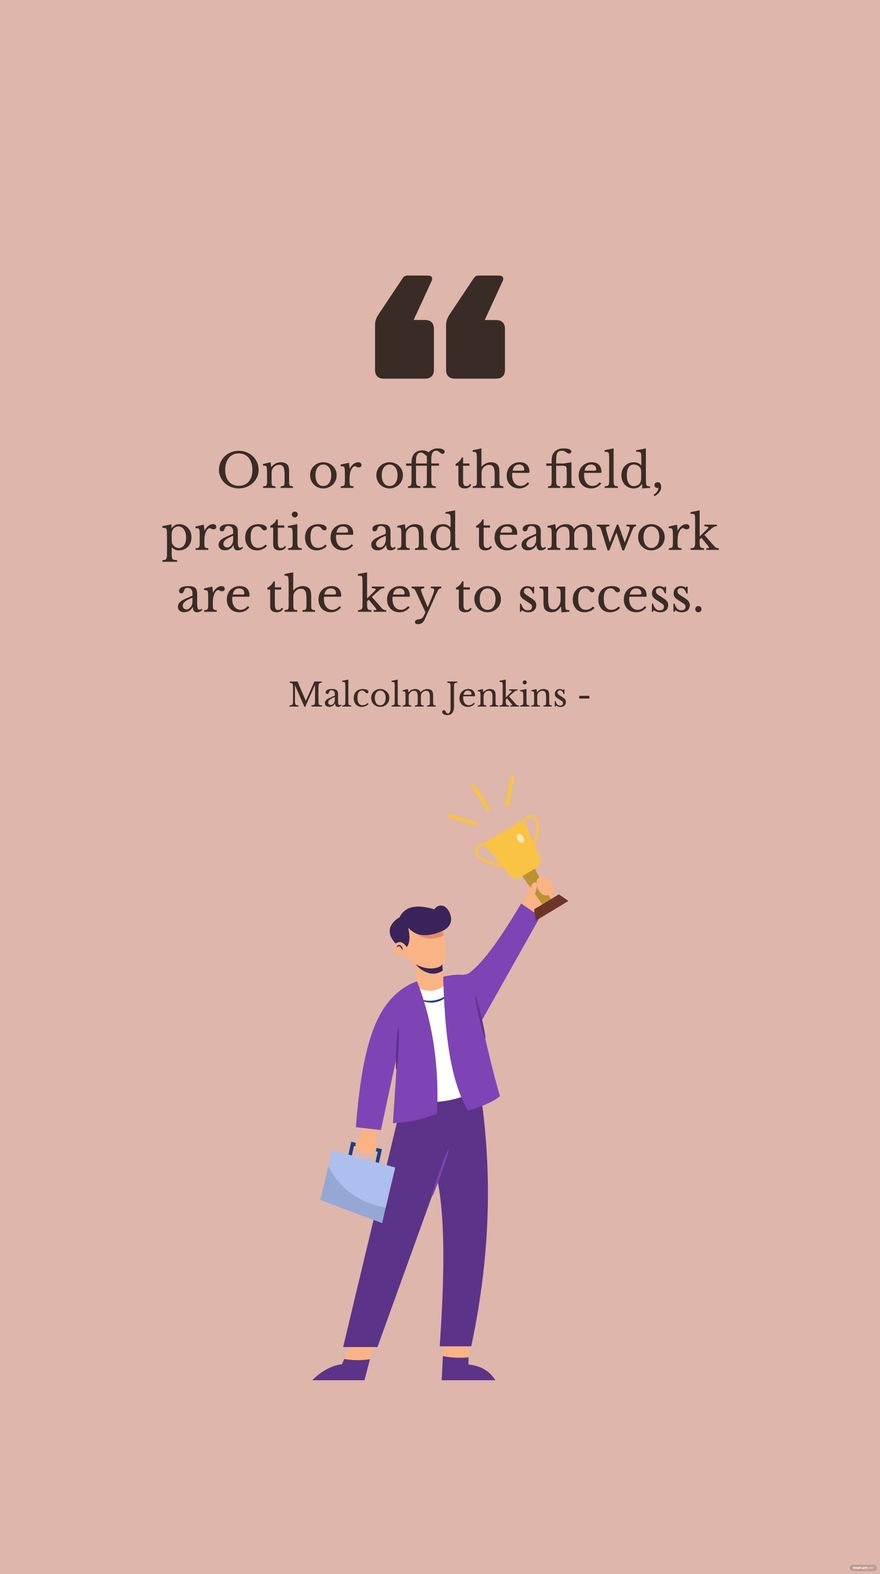 Free Malcolm Jenkins - On or off the field, practice and teamwork are the key to success.